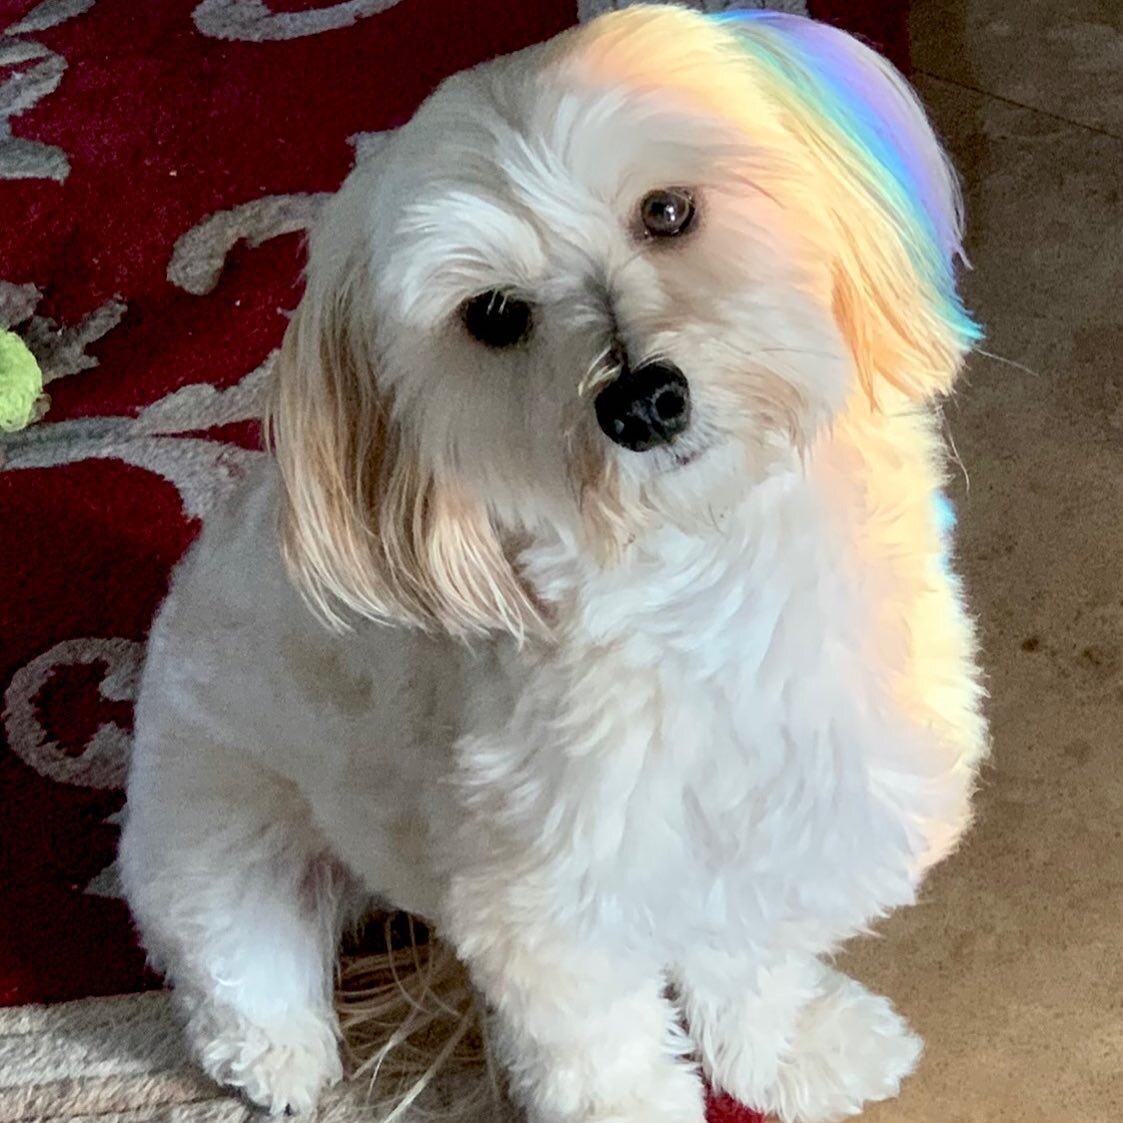 &ldquo;Hi everyone! 🐶 My name is Honey Bun, I am  a Havanese, from Cuban decent, and if I must say, I&rsquo;m an amazing furbaby! 😉🐾
My mommy Tracey, wrote an incredible children&rsquo;s book, &ldquo;A Heavenly World&rdquo;, about my sister Precio